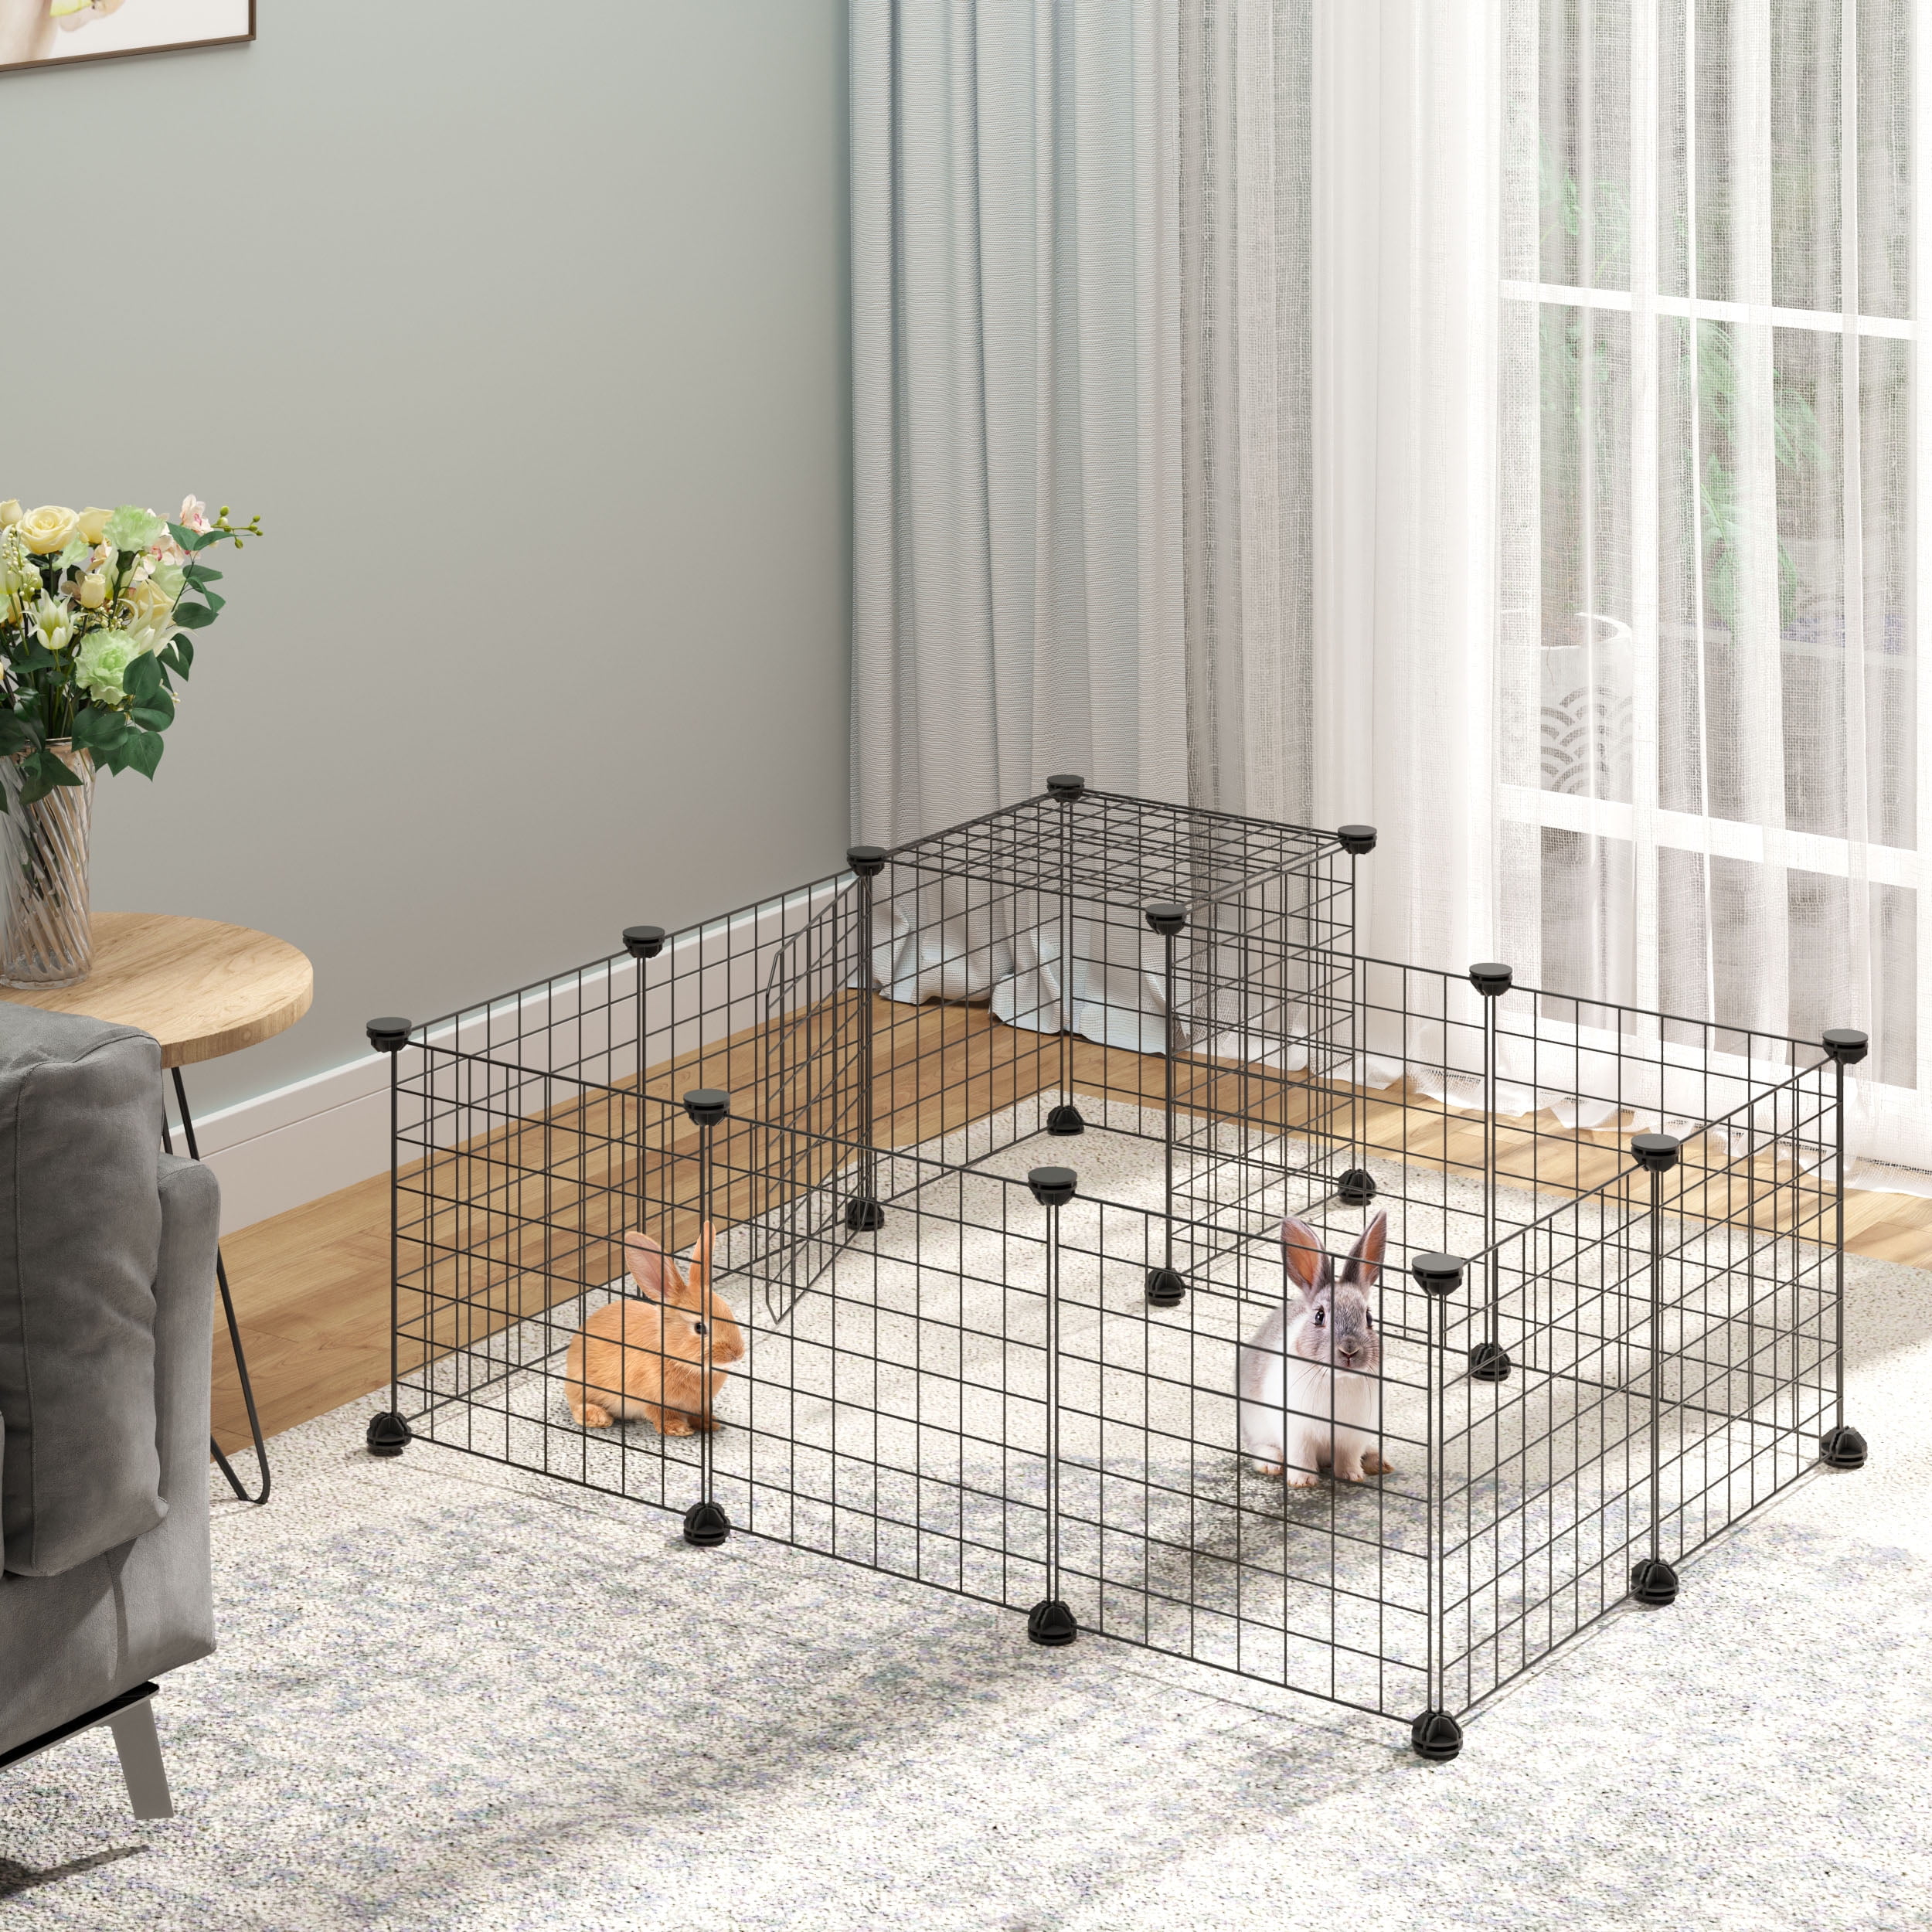 Pawhut Small Animal Cage With Playpen, Pet Habitat Indoor For Guinea Pigs  Hedgehogs Bunnies With Water Bottle, Food Dish, Feeding Trough, 42x33x21  : Target